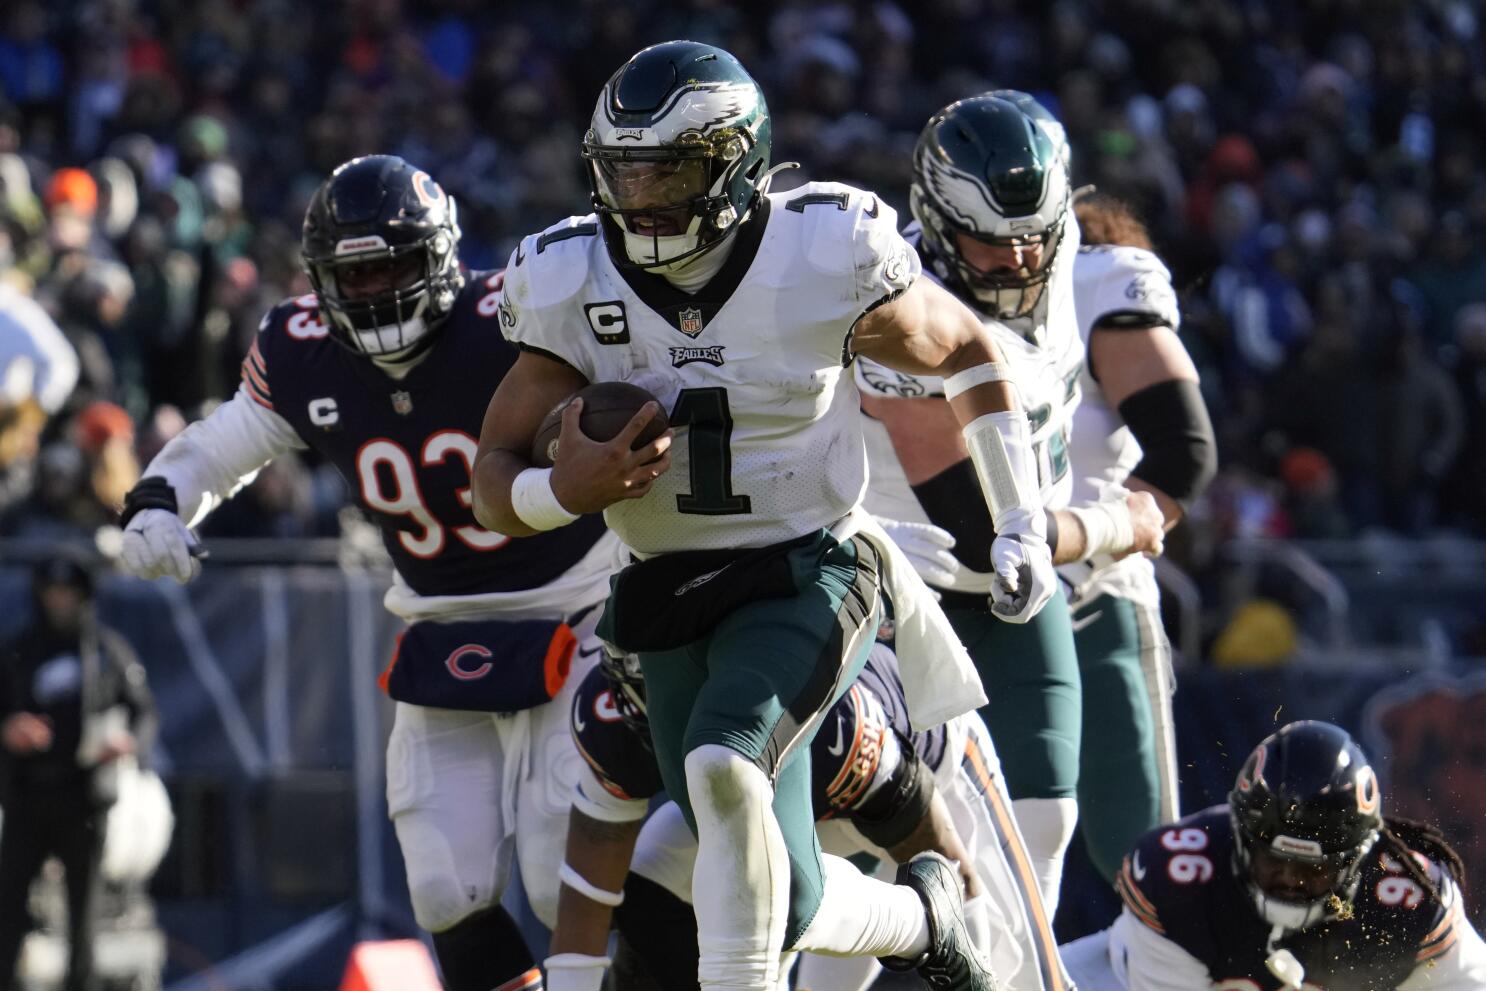 AP source: Eagles QB Hurts suffers sprained right shoulder - The